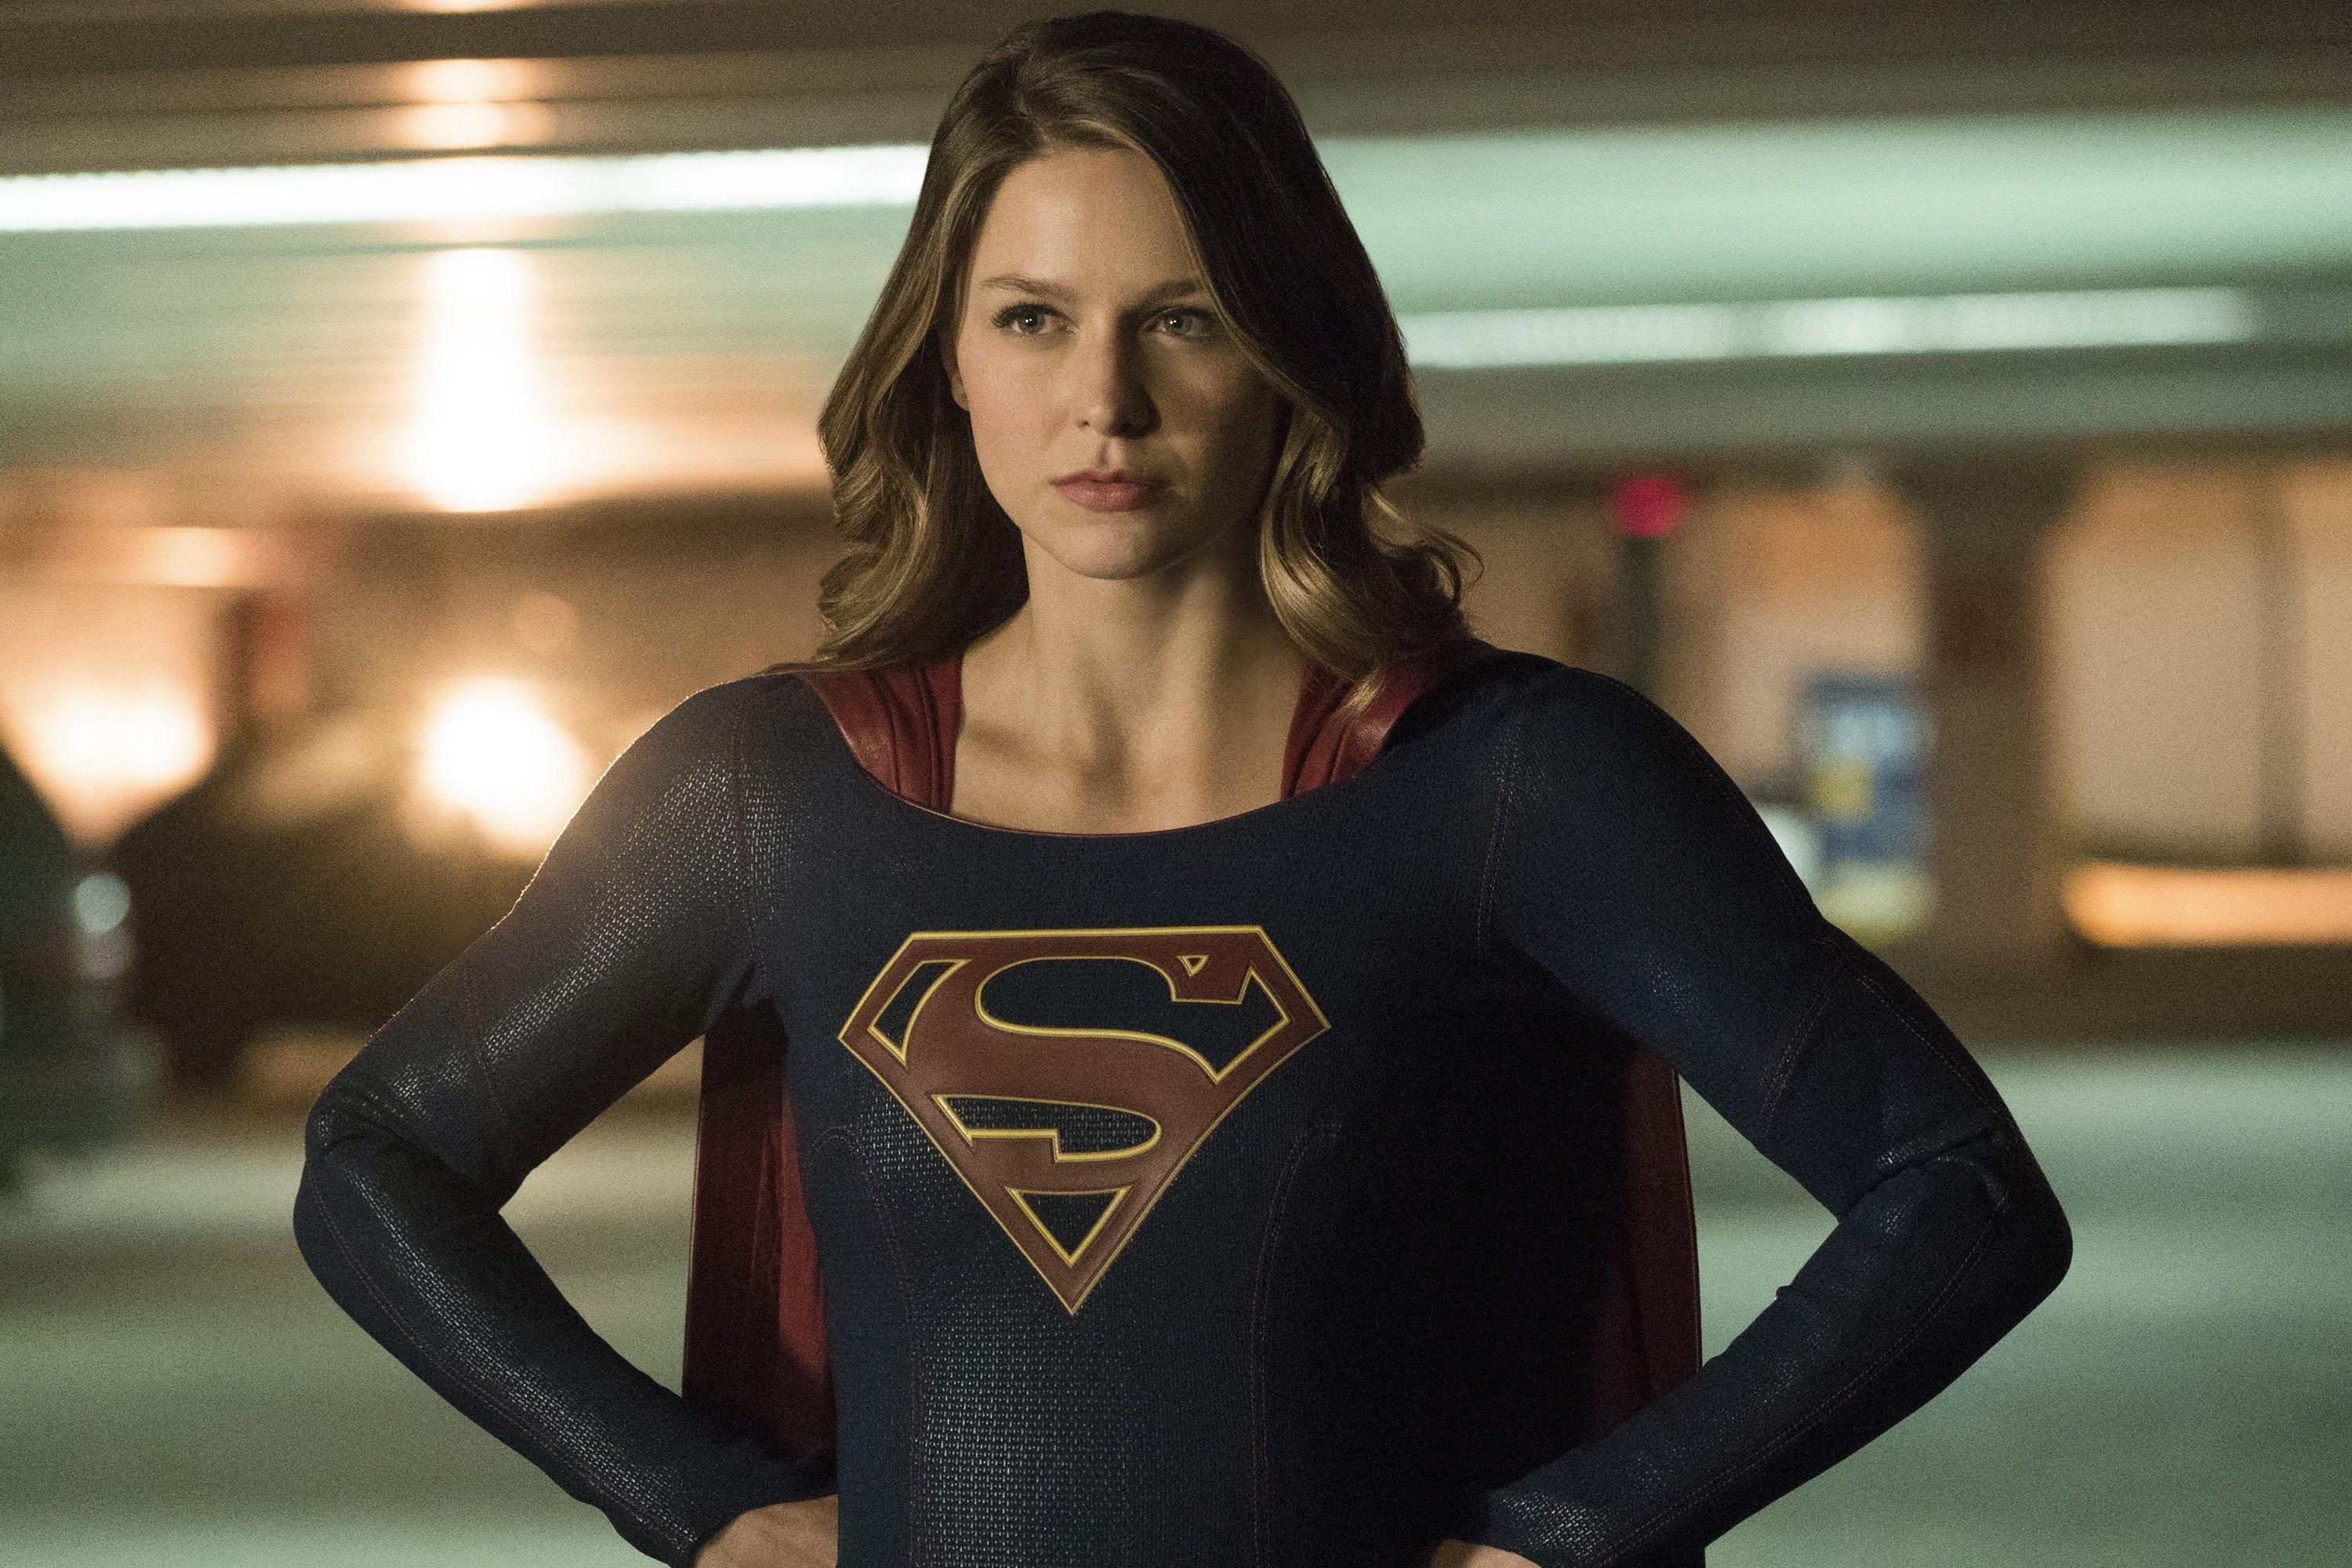 Melissa Benoist In Supergirl Tv Show, HD Tv Shows, 4k Wallpaper, Image, Background, Photo and Picture